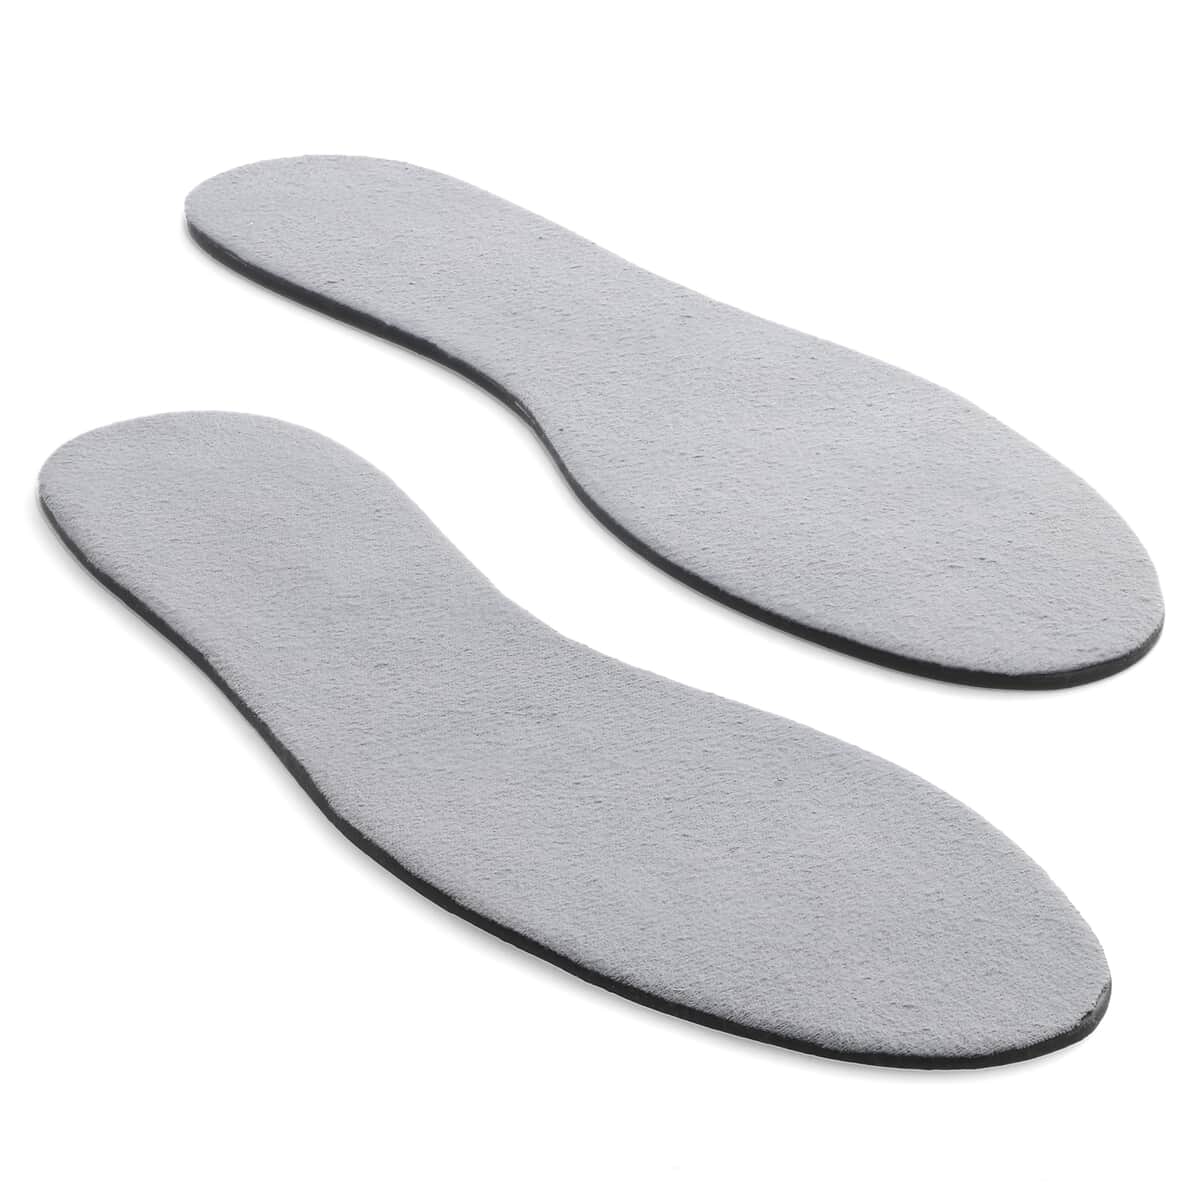 Pair of Gray and Green Shungite Infused Gel Insoles (Uses Gel Polymer) image number 0